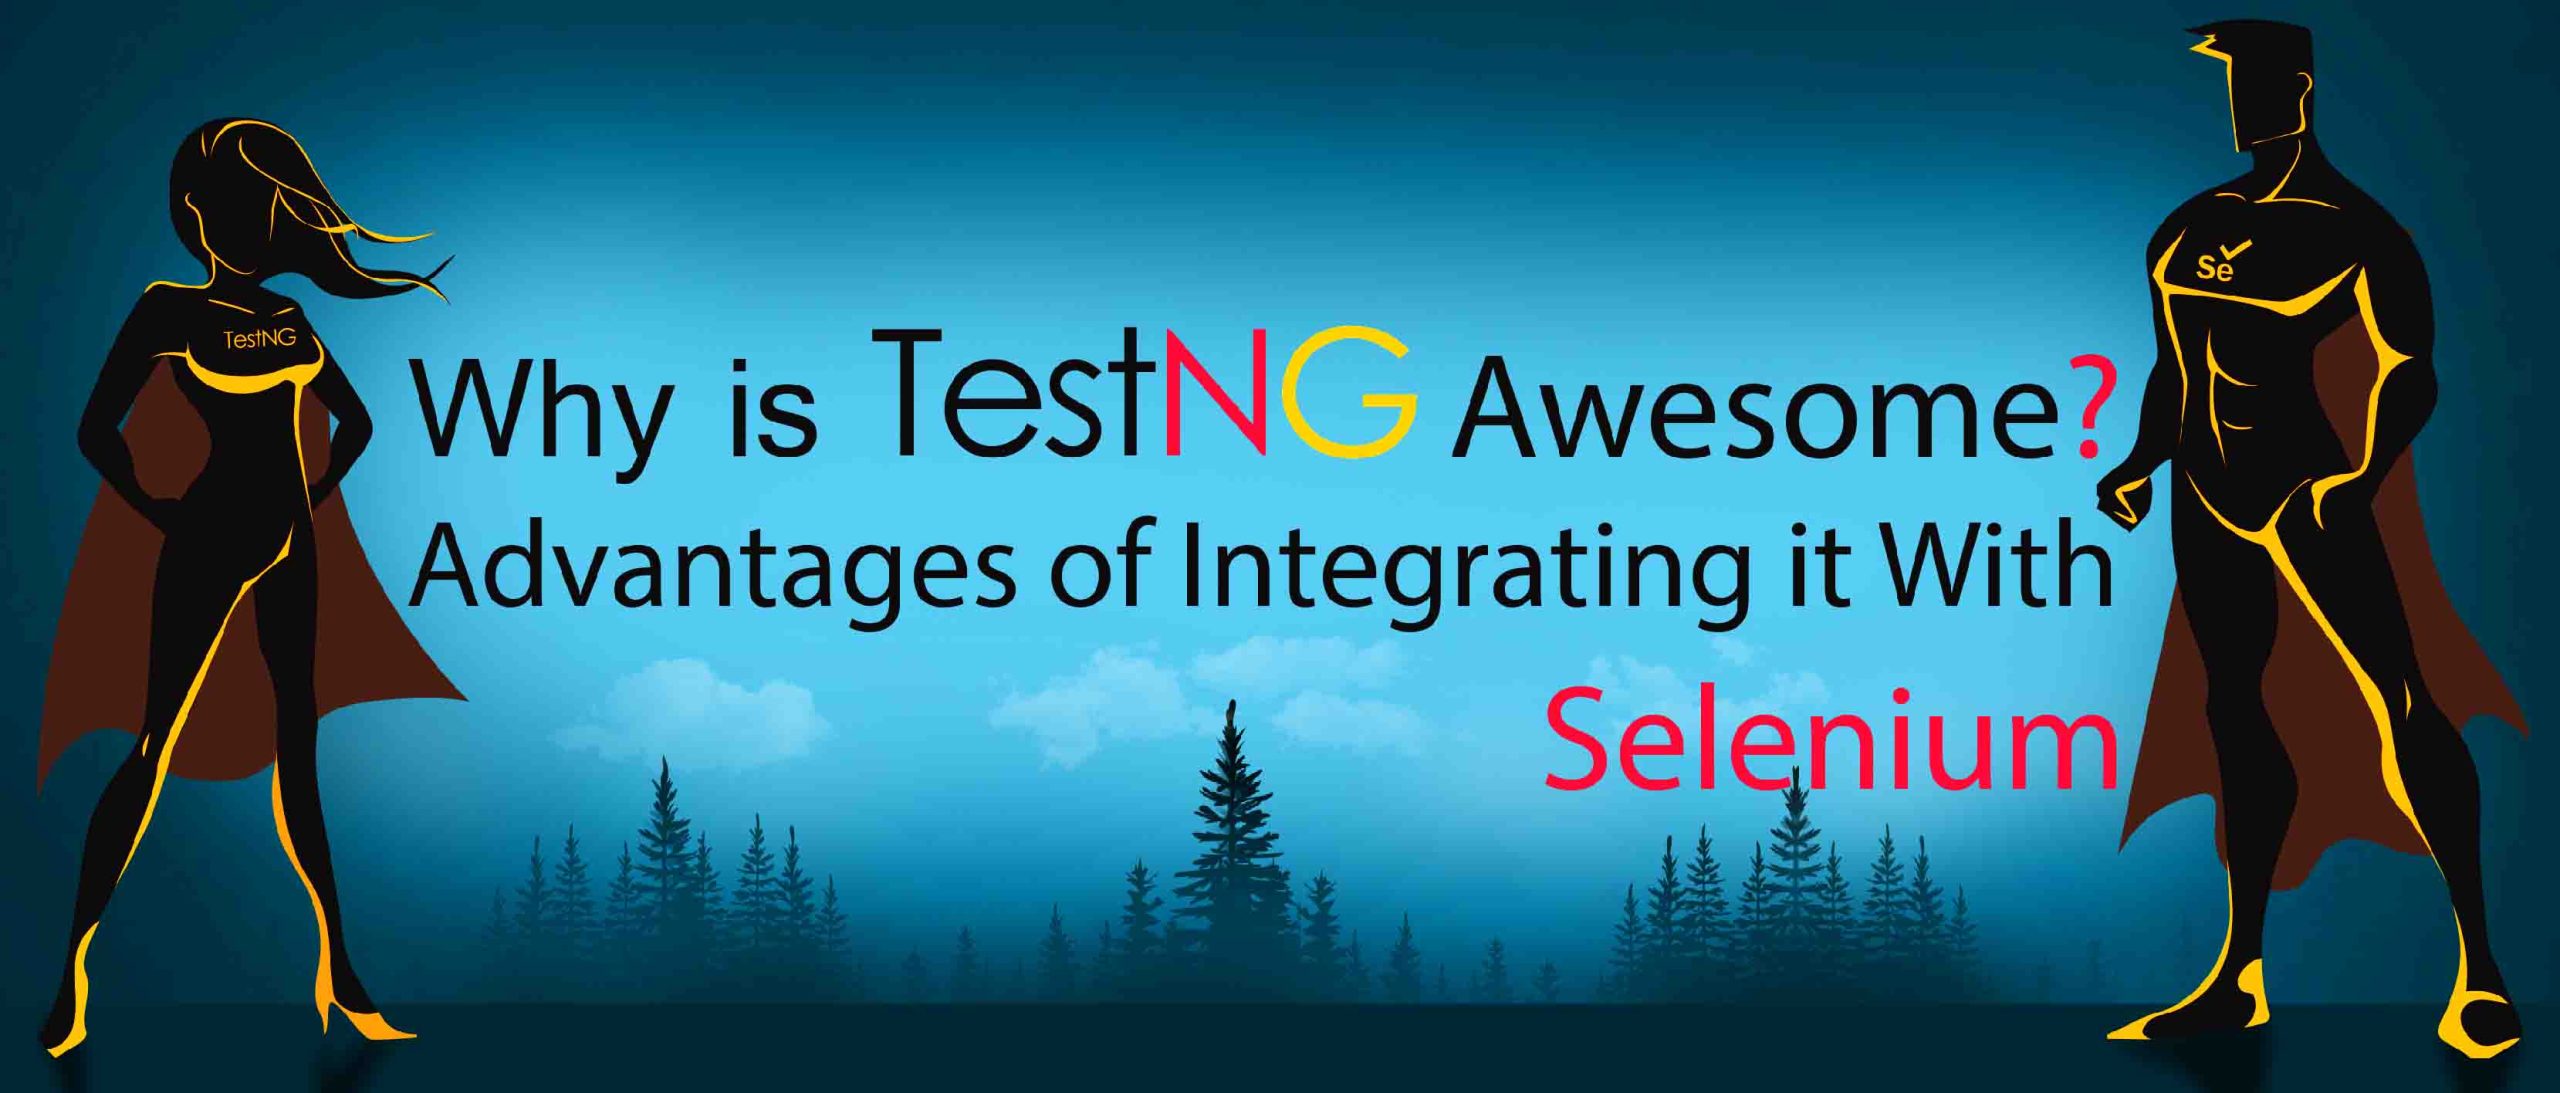 Why is TestNG Awesome? Advantages of Integrating it with Selenium